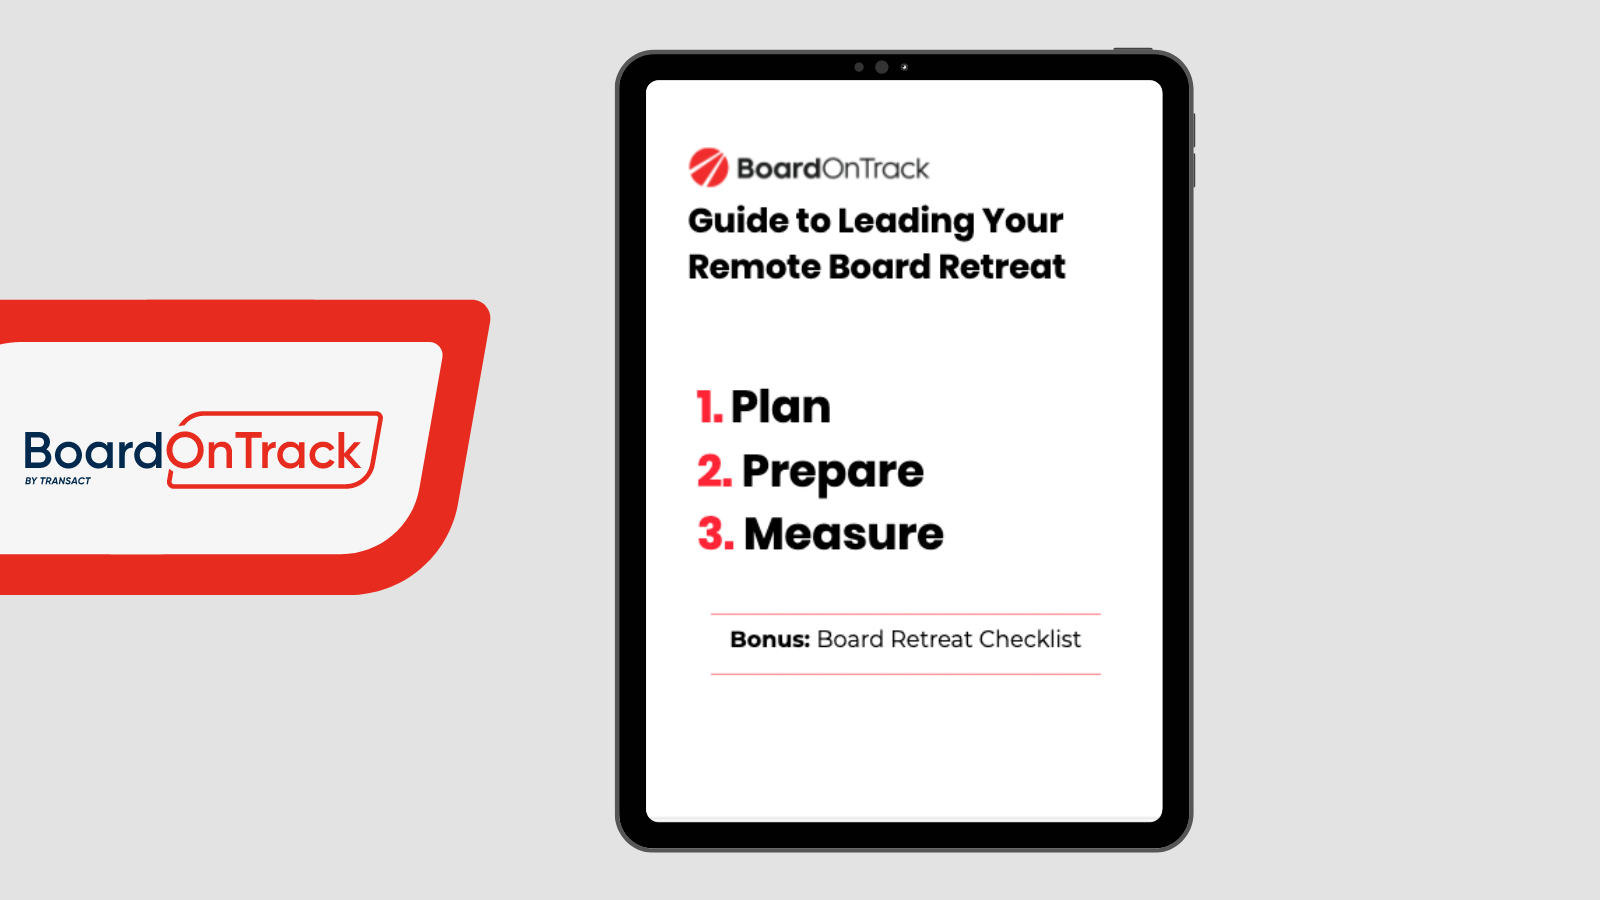 Guide to Leading Your Remote Board Retreat